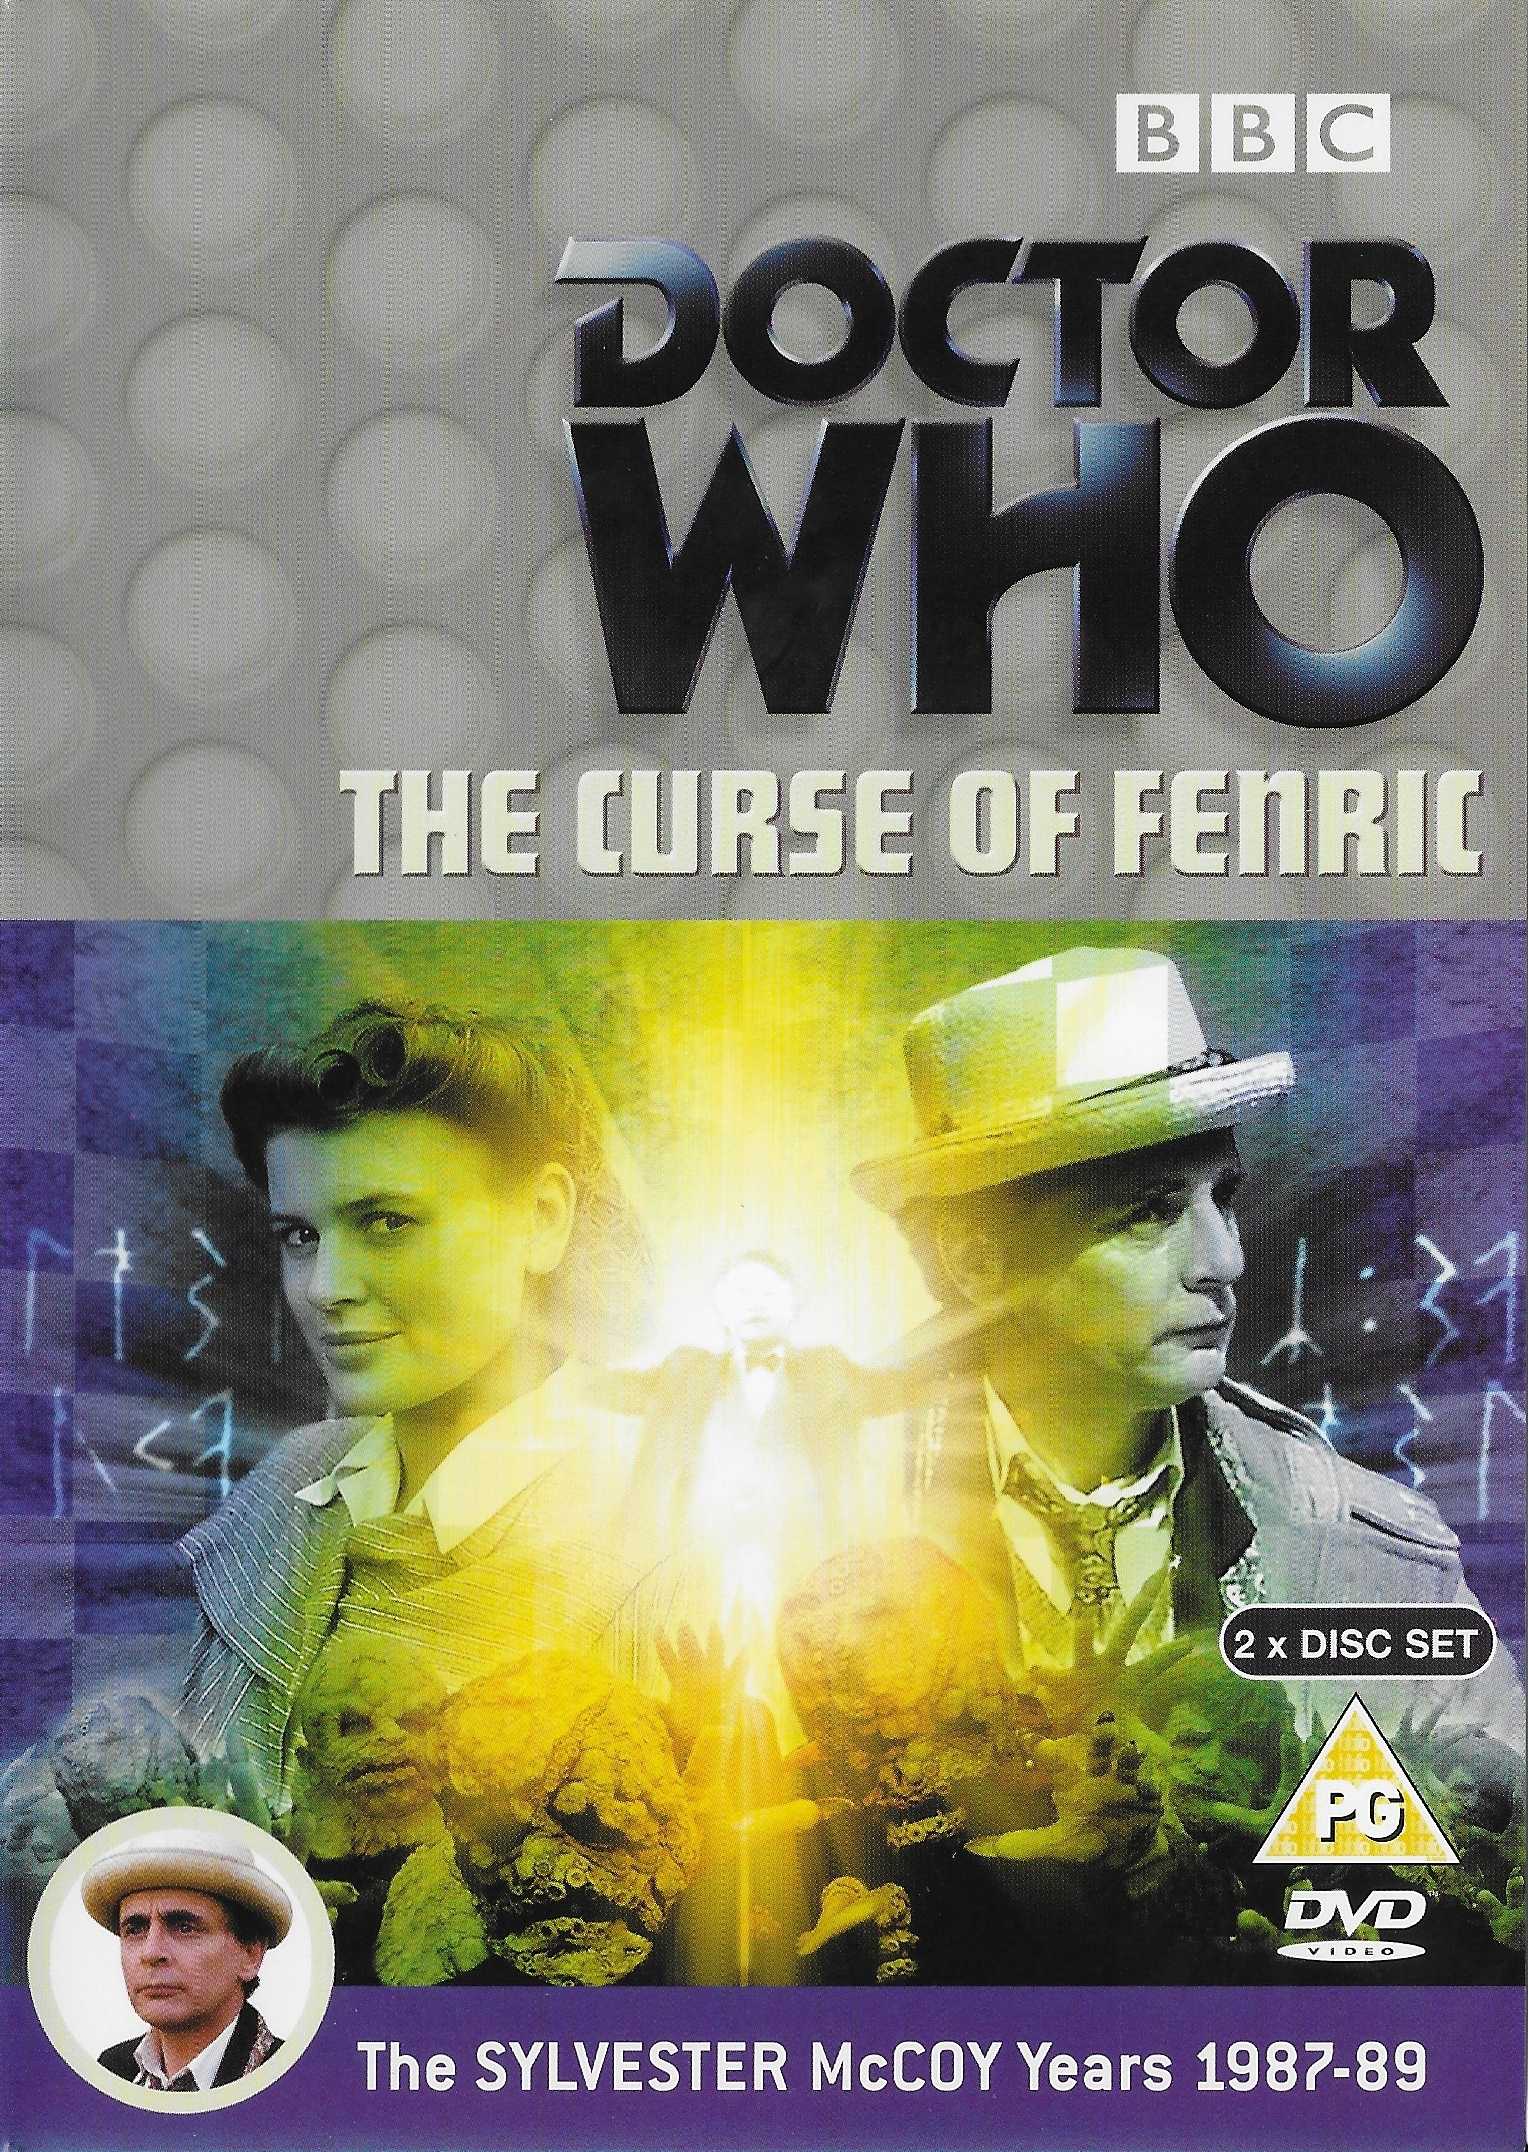 Picture of BBCDVD 1154 Doctor Who - The curse of Fenric by artist Ian Briggs from the BBC records and Tapes library